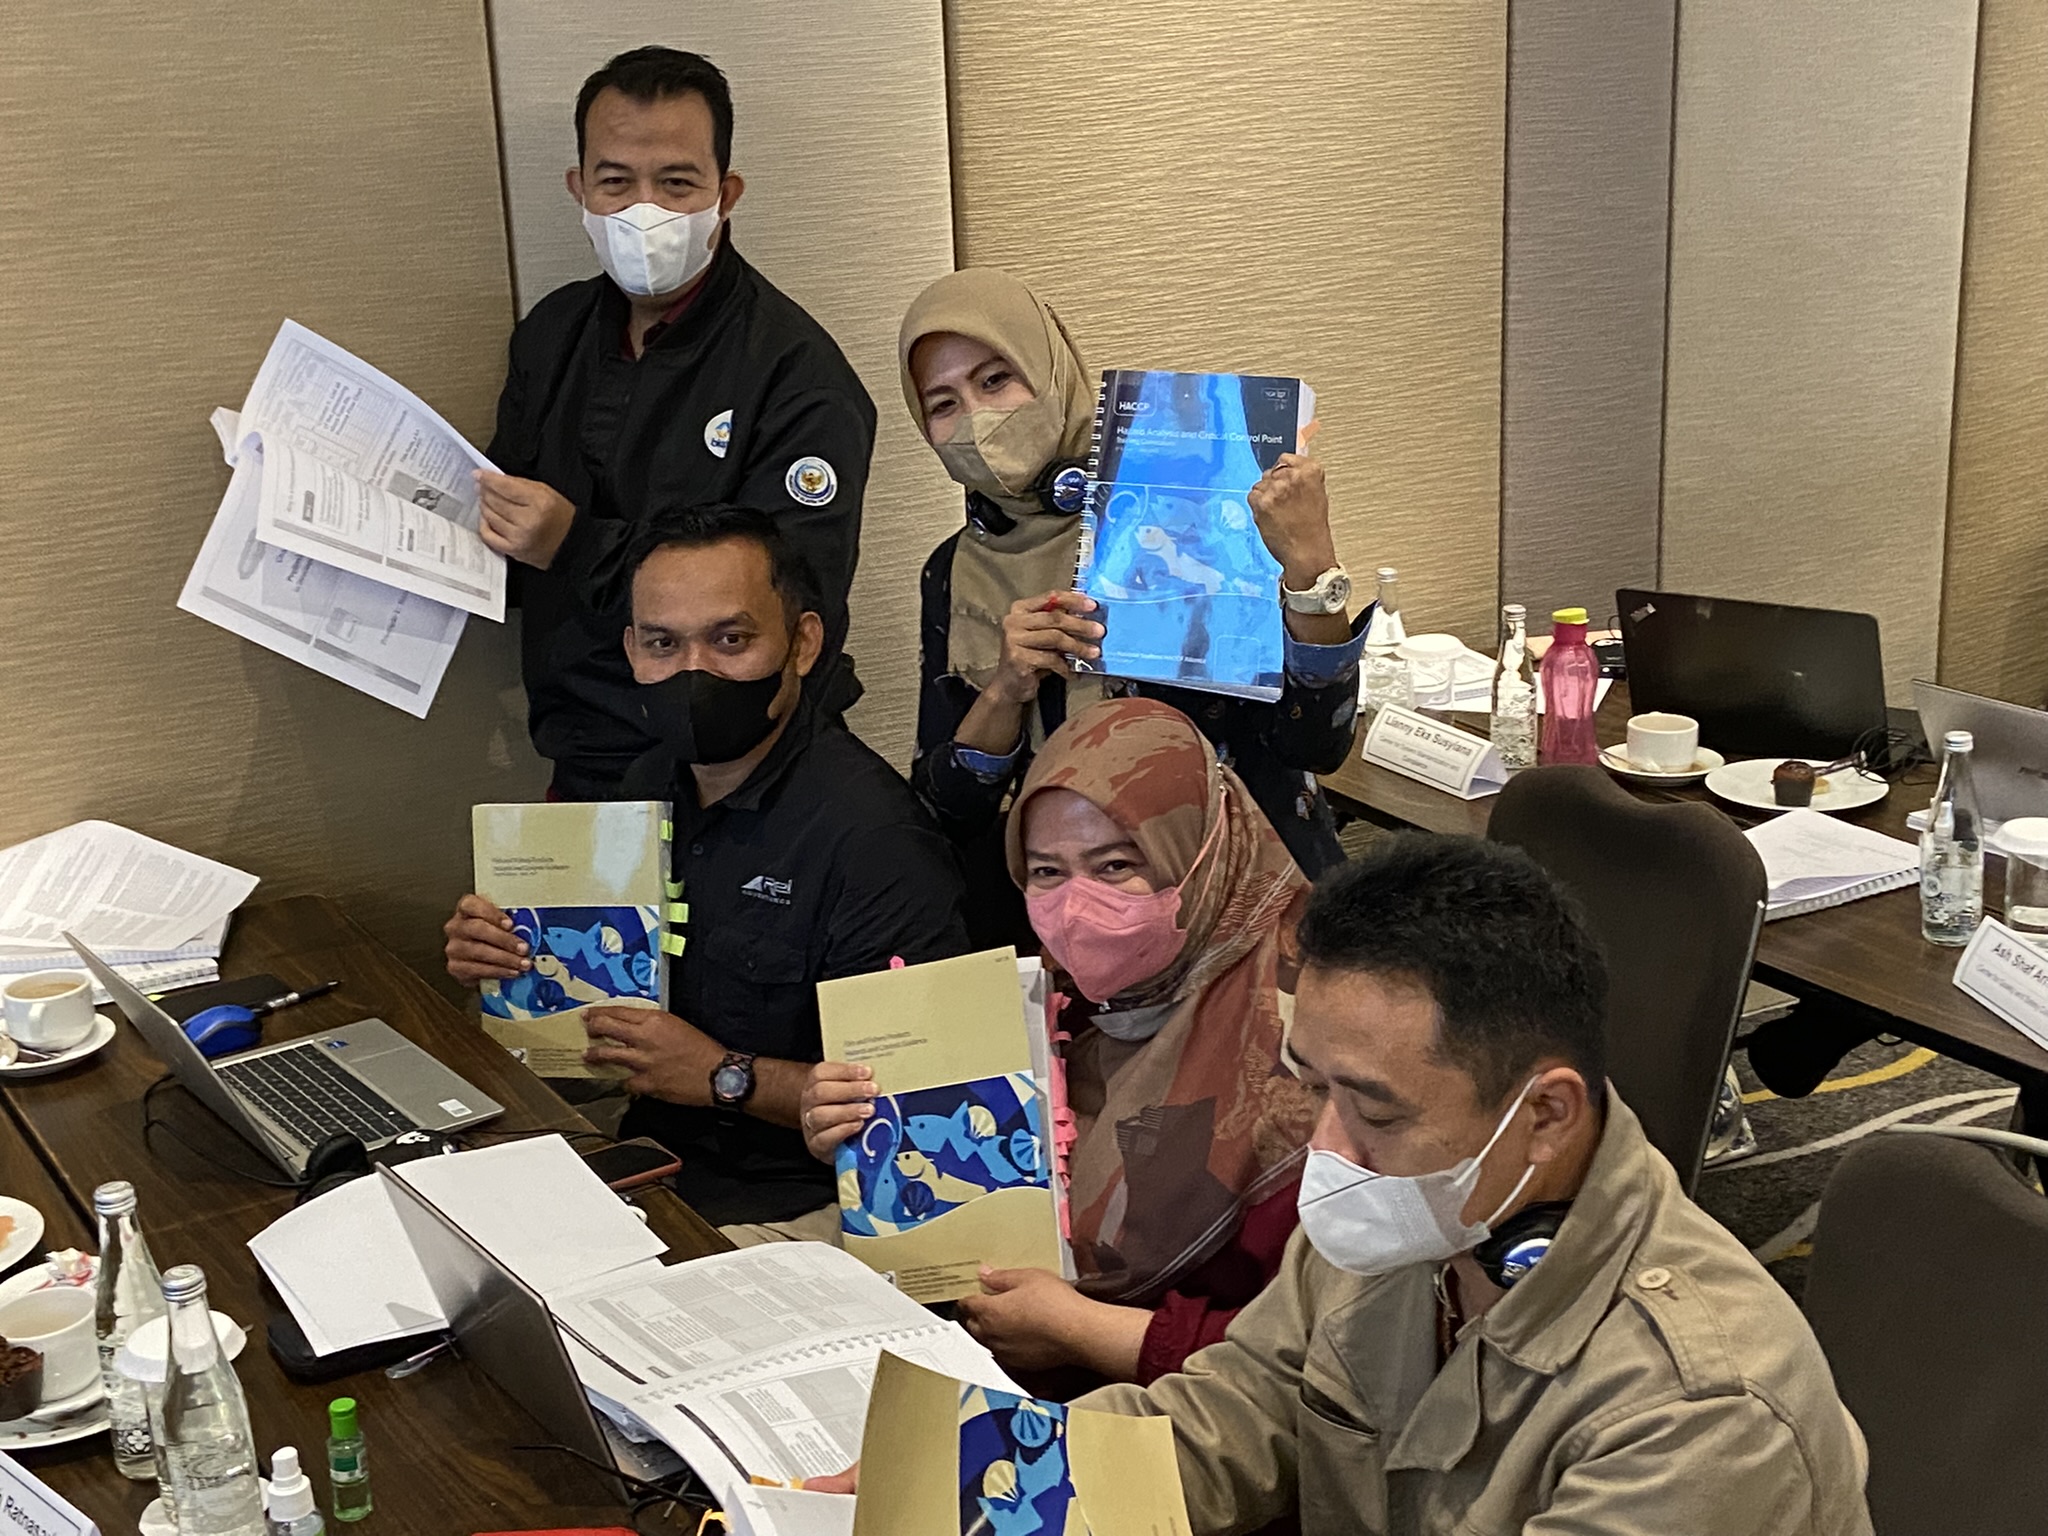 Indonesian participants holding the Fish and Fishery Products Hazards and Controls Guidance manual.